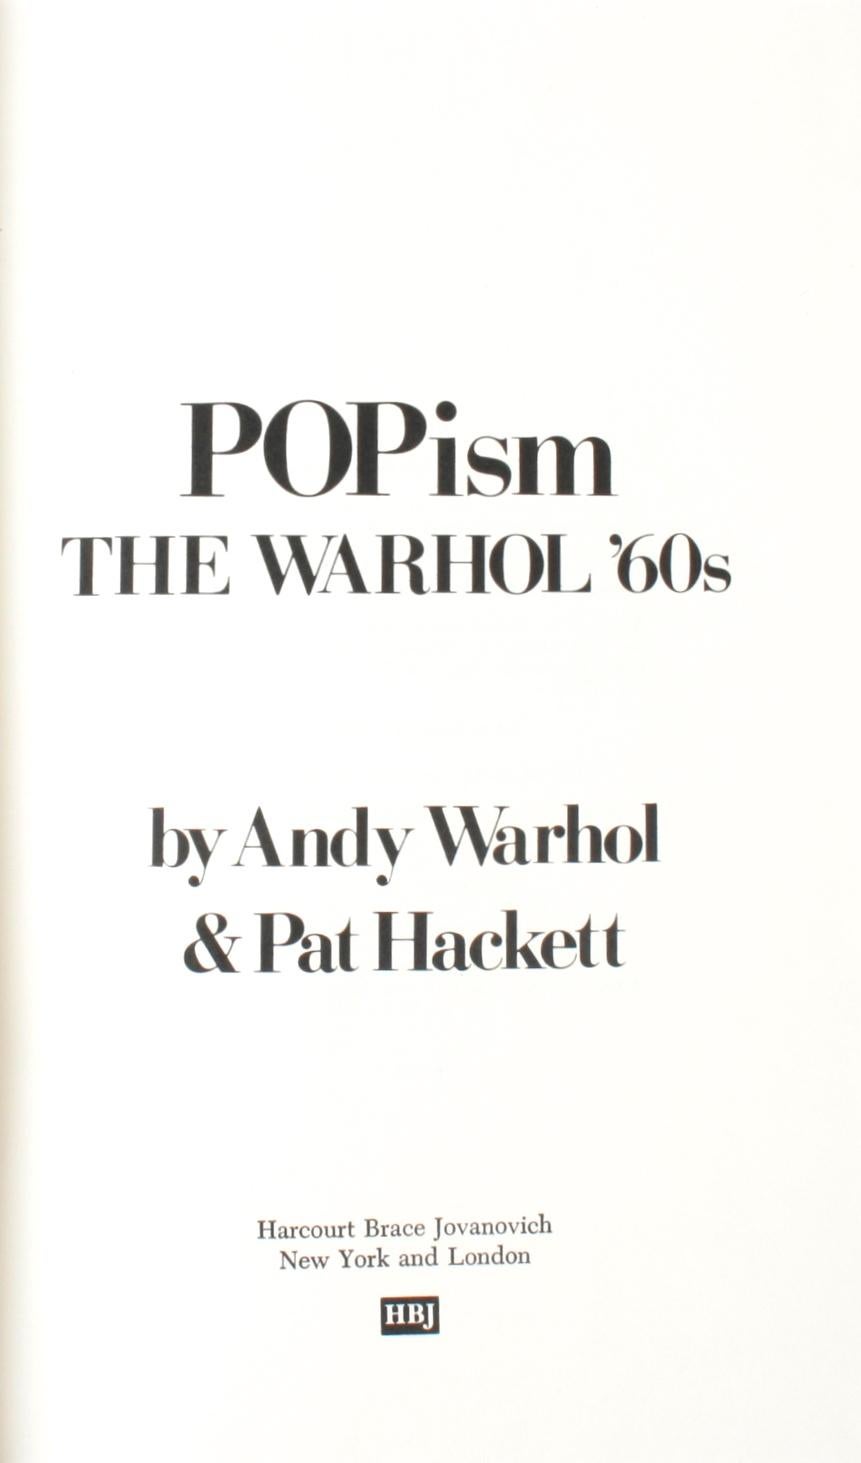 Popism: The Warhol '60s by Andy Warhol. Harcourt Brace Jovanovich, NY, 1980. Hardcover with dust jacket. Anecdotal, funny, frank, Popism is Warhol’s personal view of the Pop phenomenon in NY in the 1960s and a look back at the relationships that